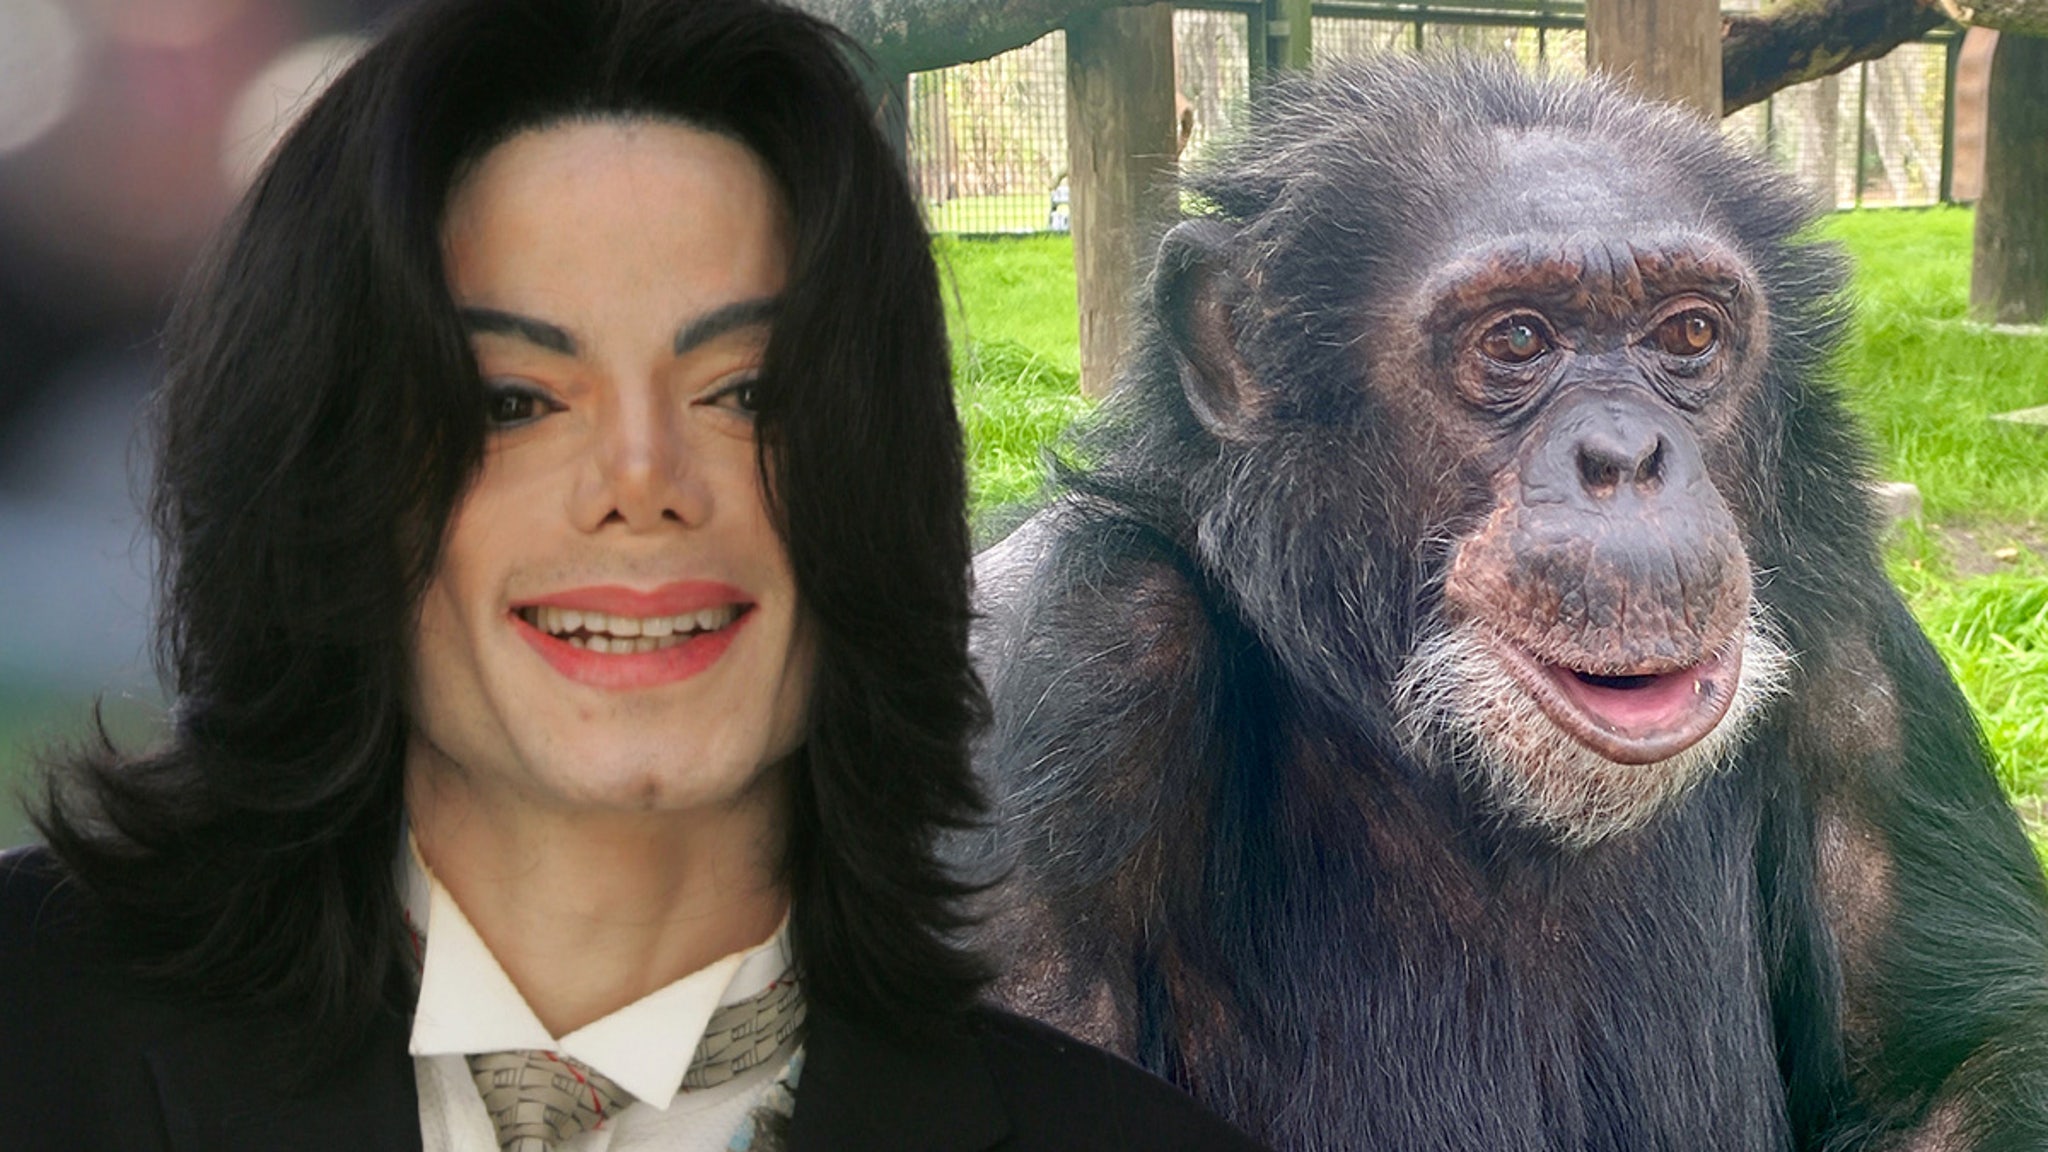 Michael Jackson Would Be Happy With Bubbles the Chimp’s Life, Says Sanctuary